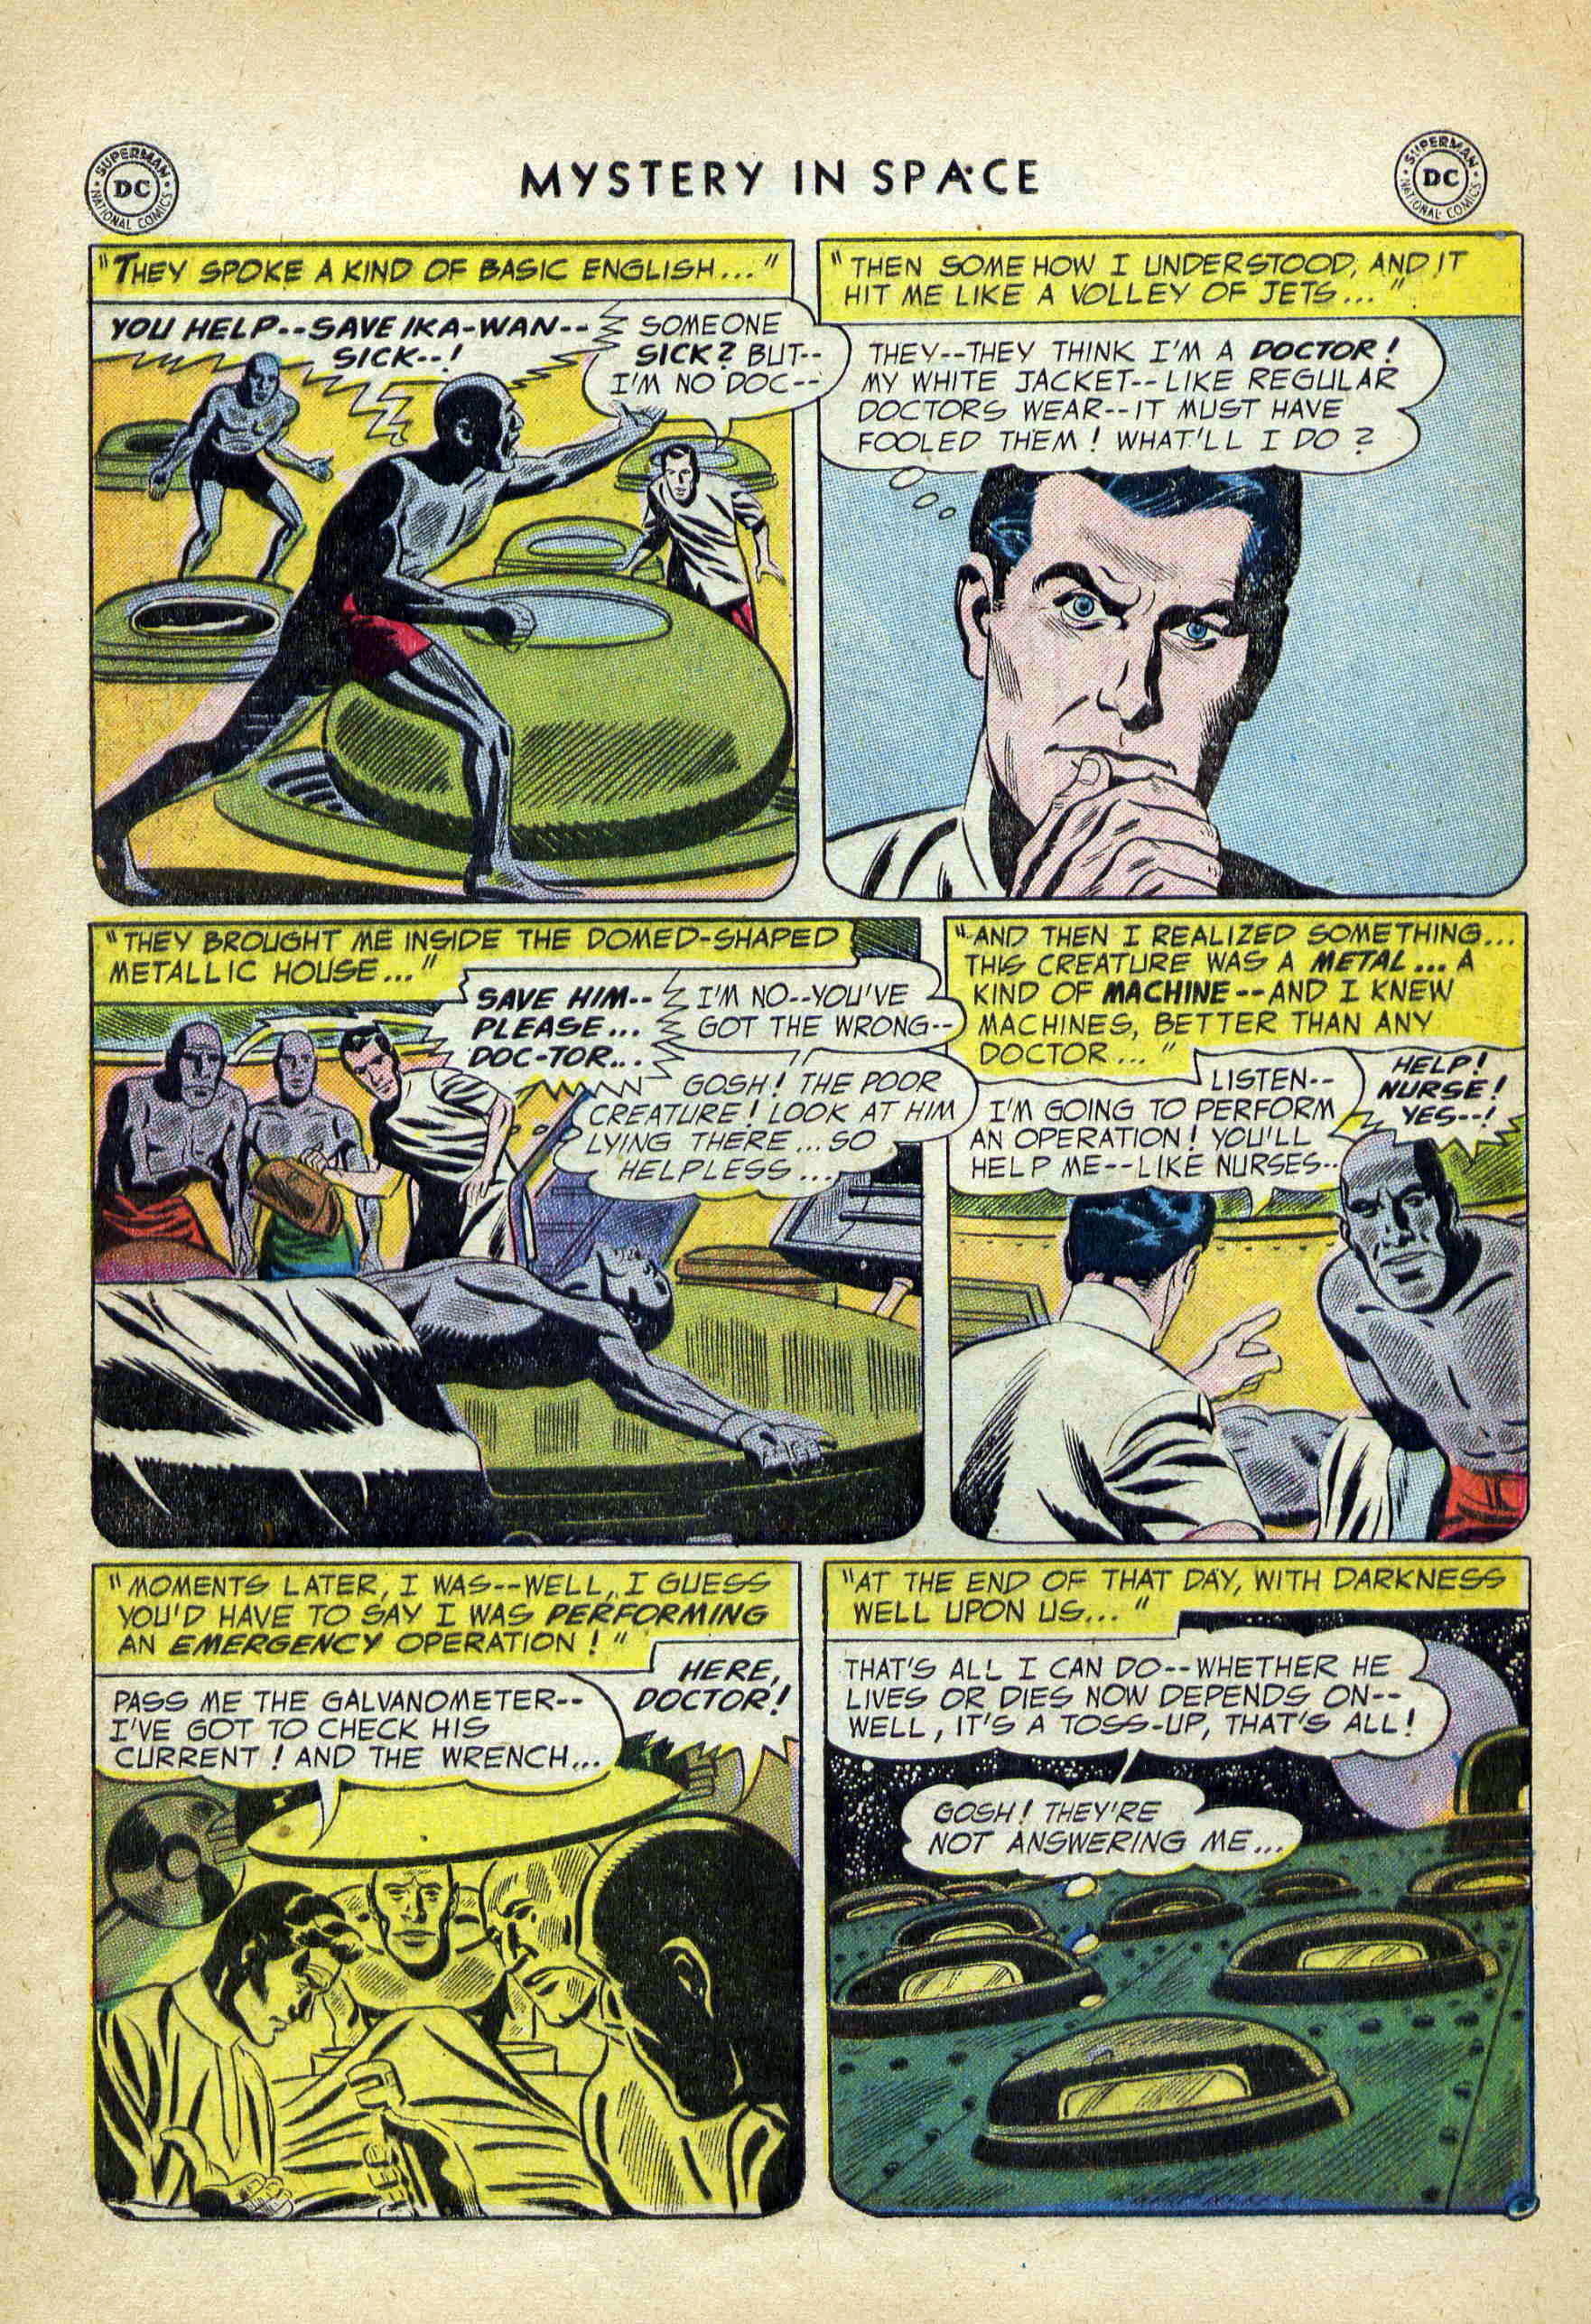 Mystery in Space (1951) 26 Page 15